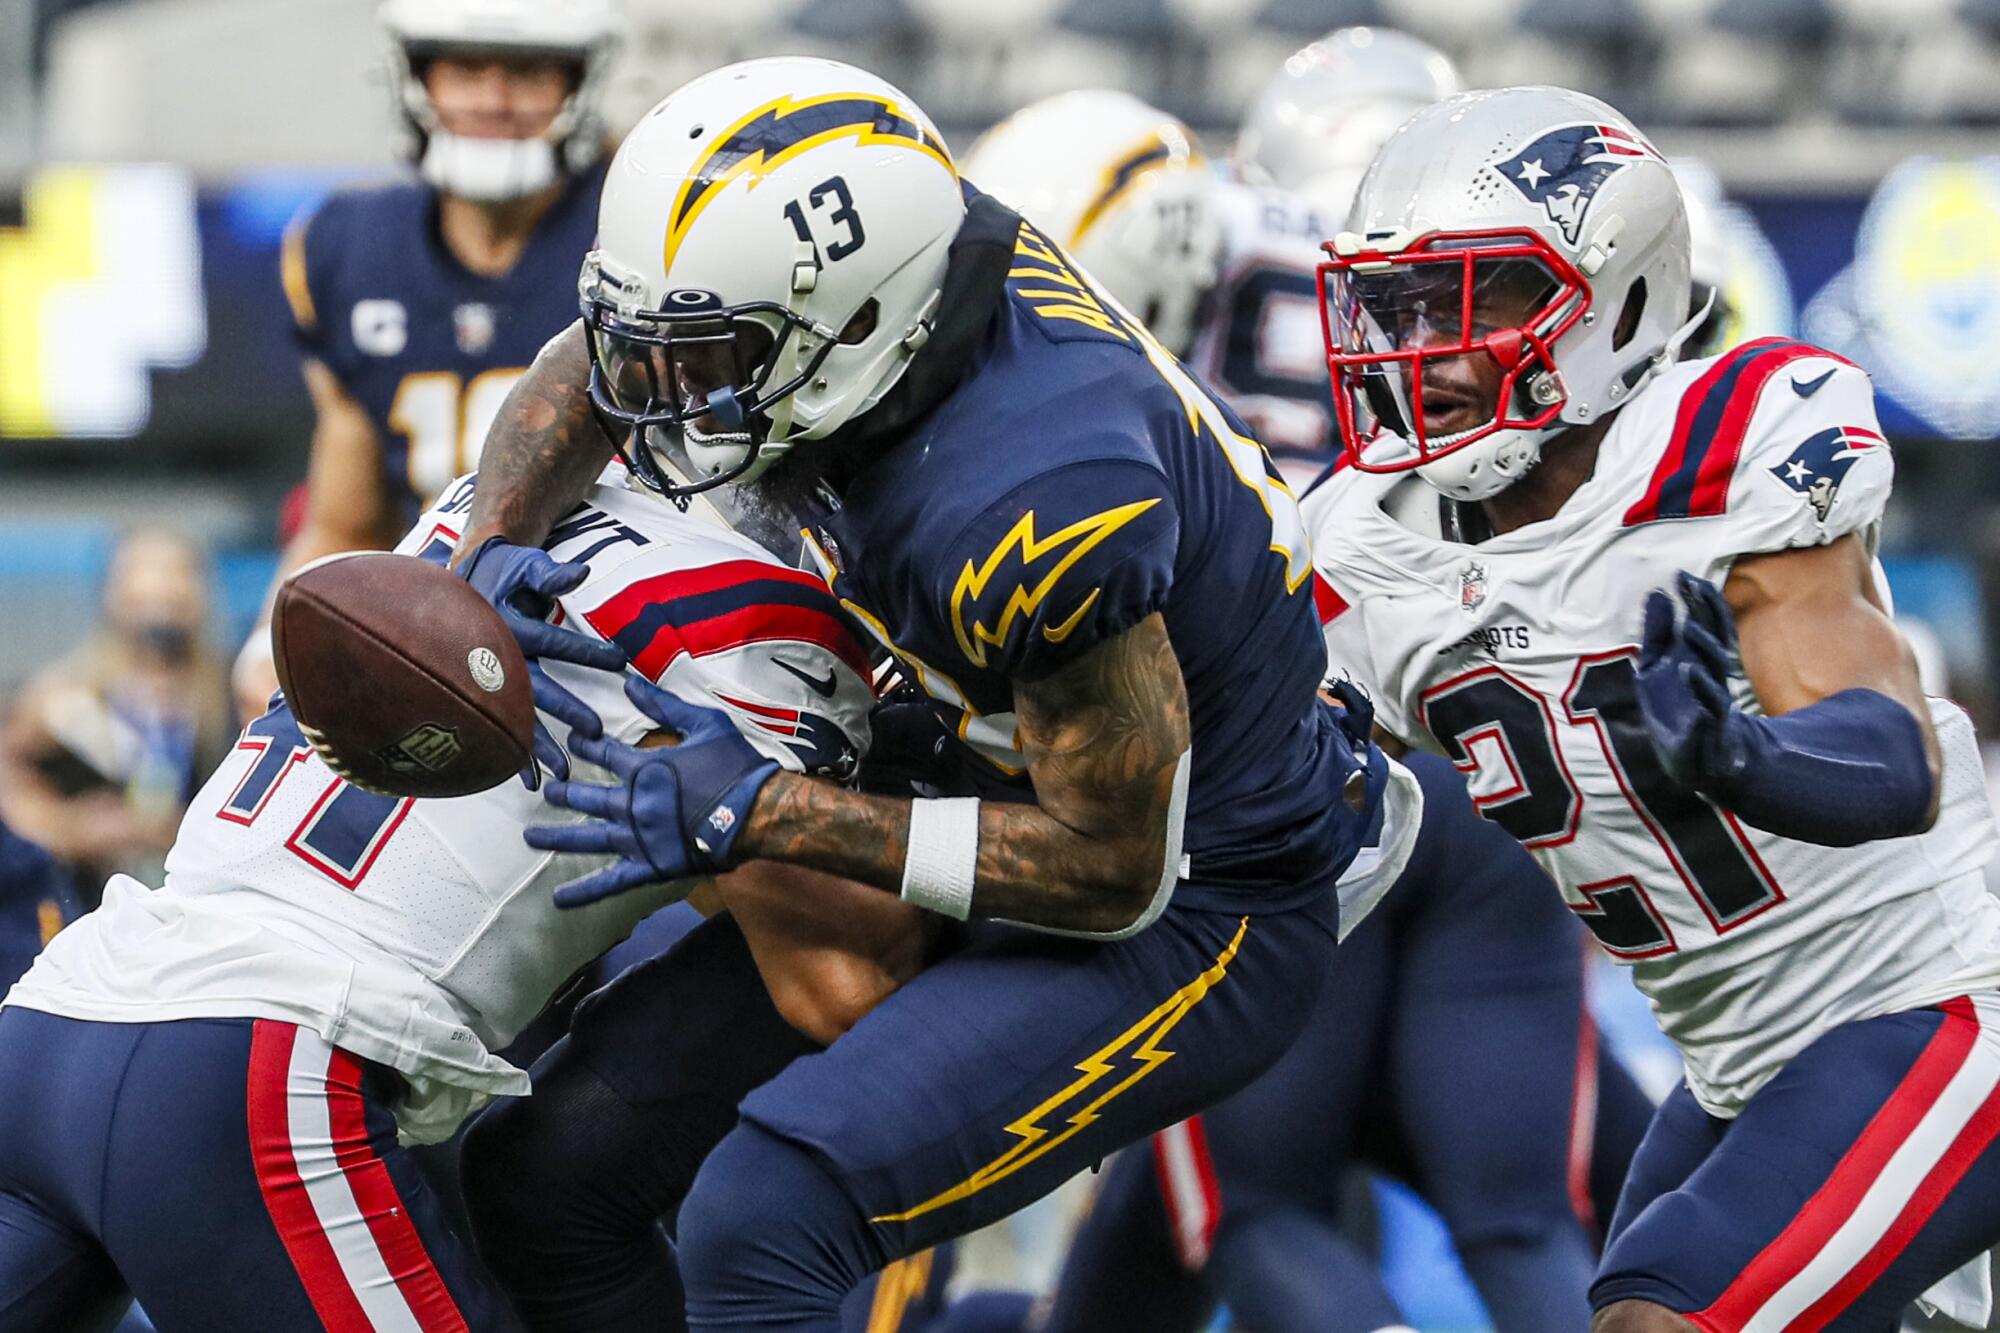 Photos: Chargers lose in revenge game against Patriots - Los Angeles Times